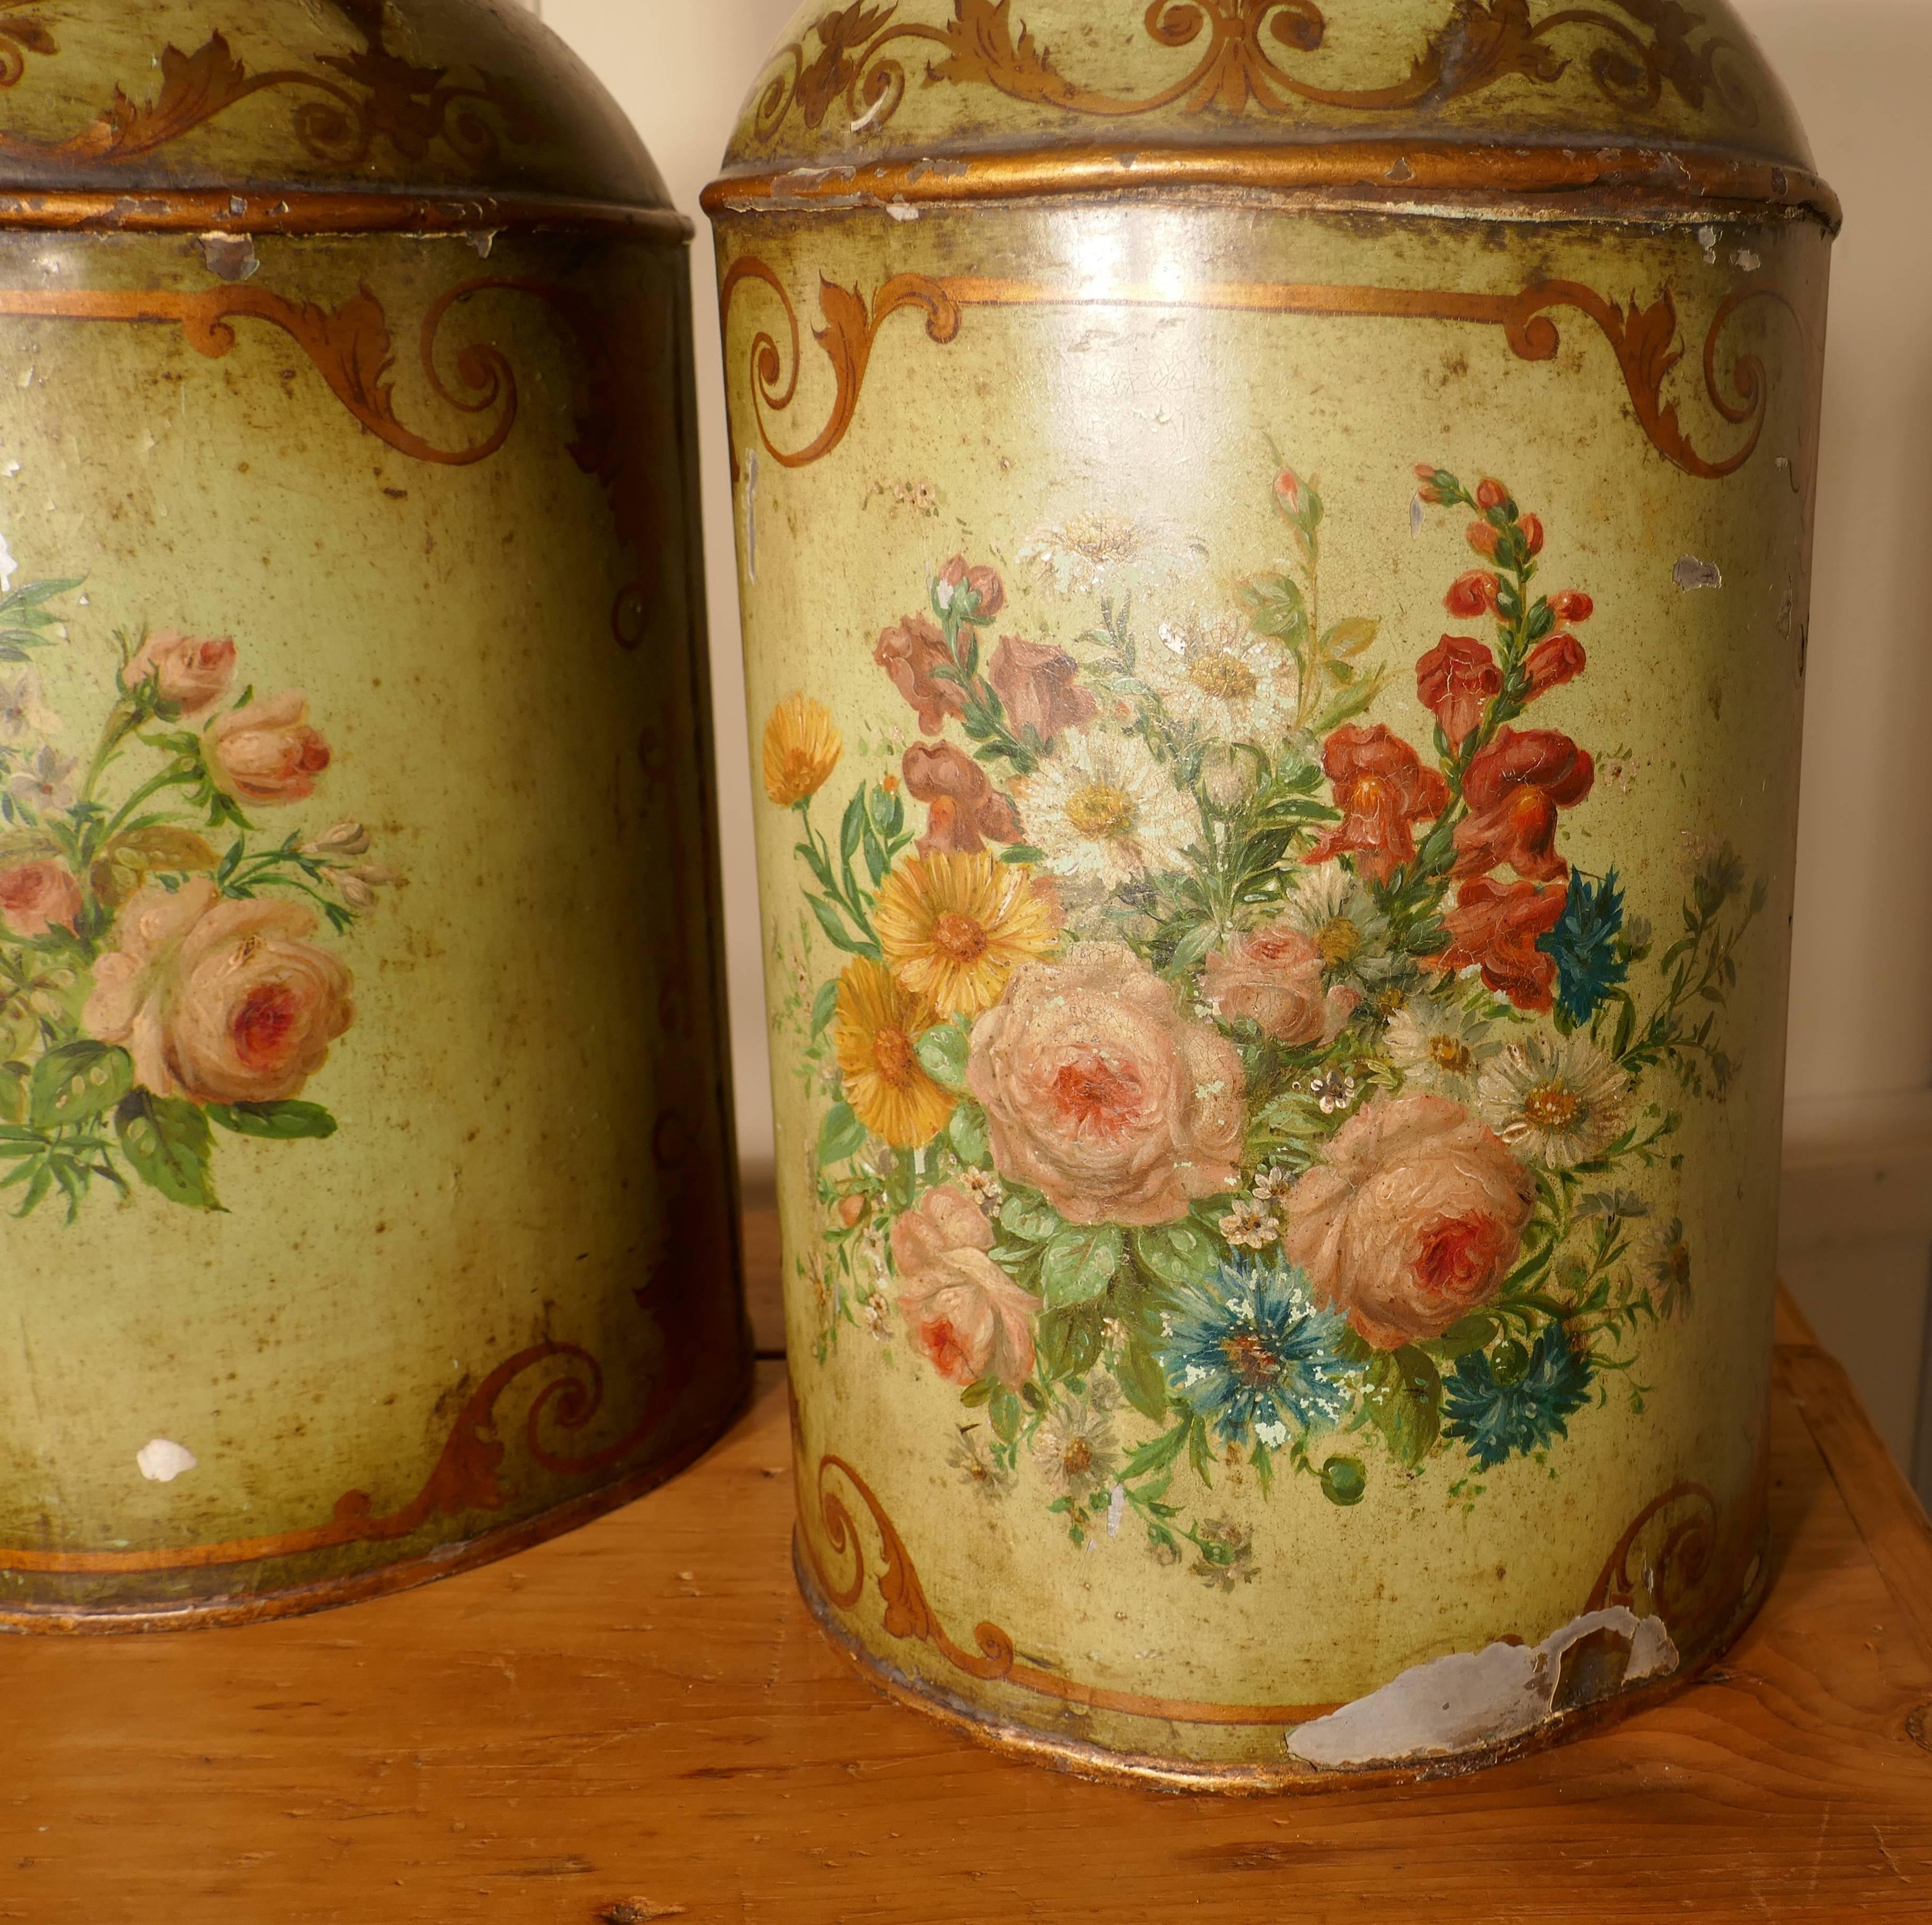 English Pair of Early Very Large Hand-Painted Toleware Tea Canisters with Lids